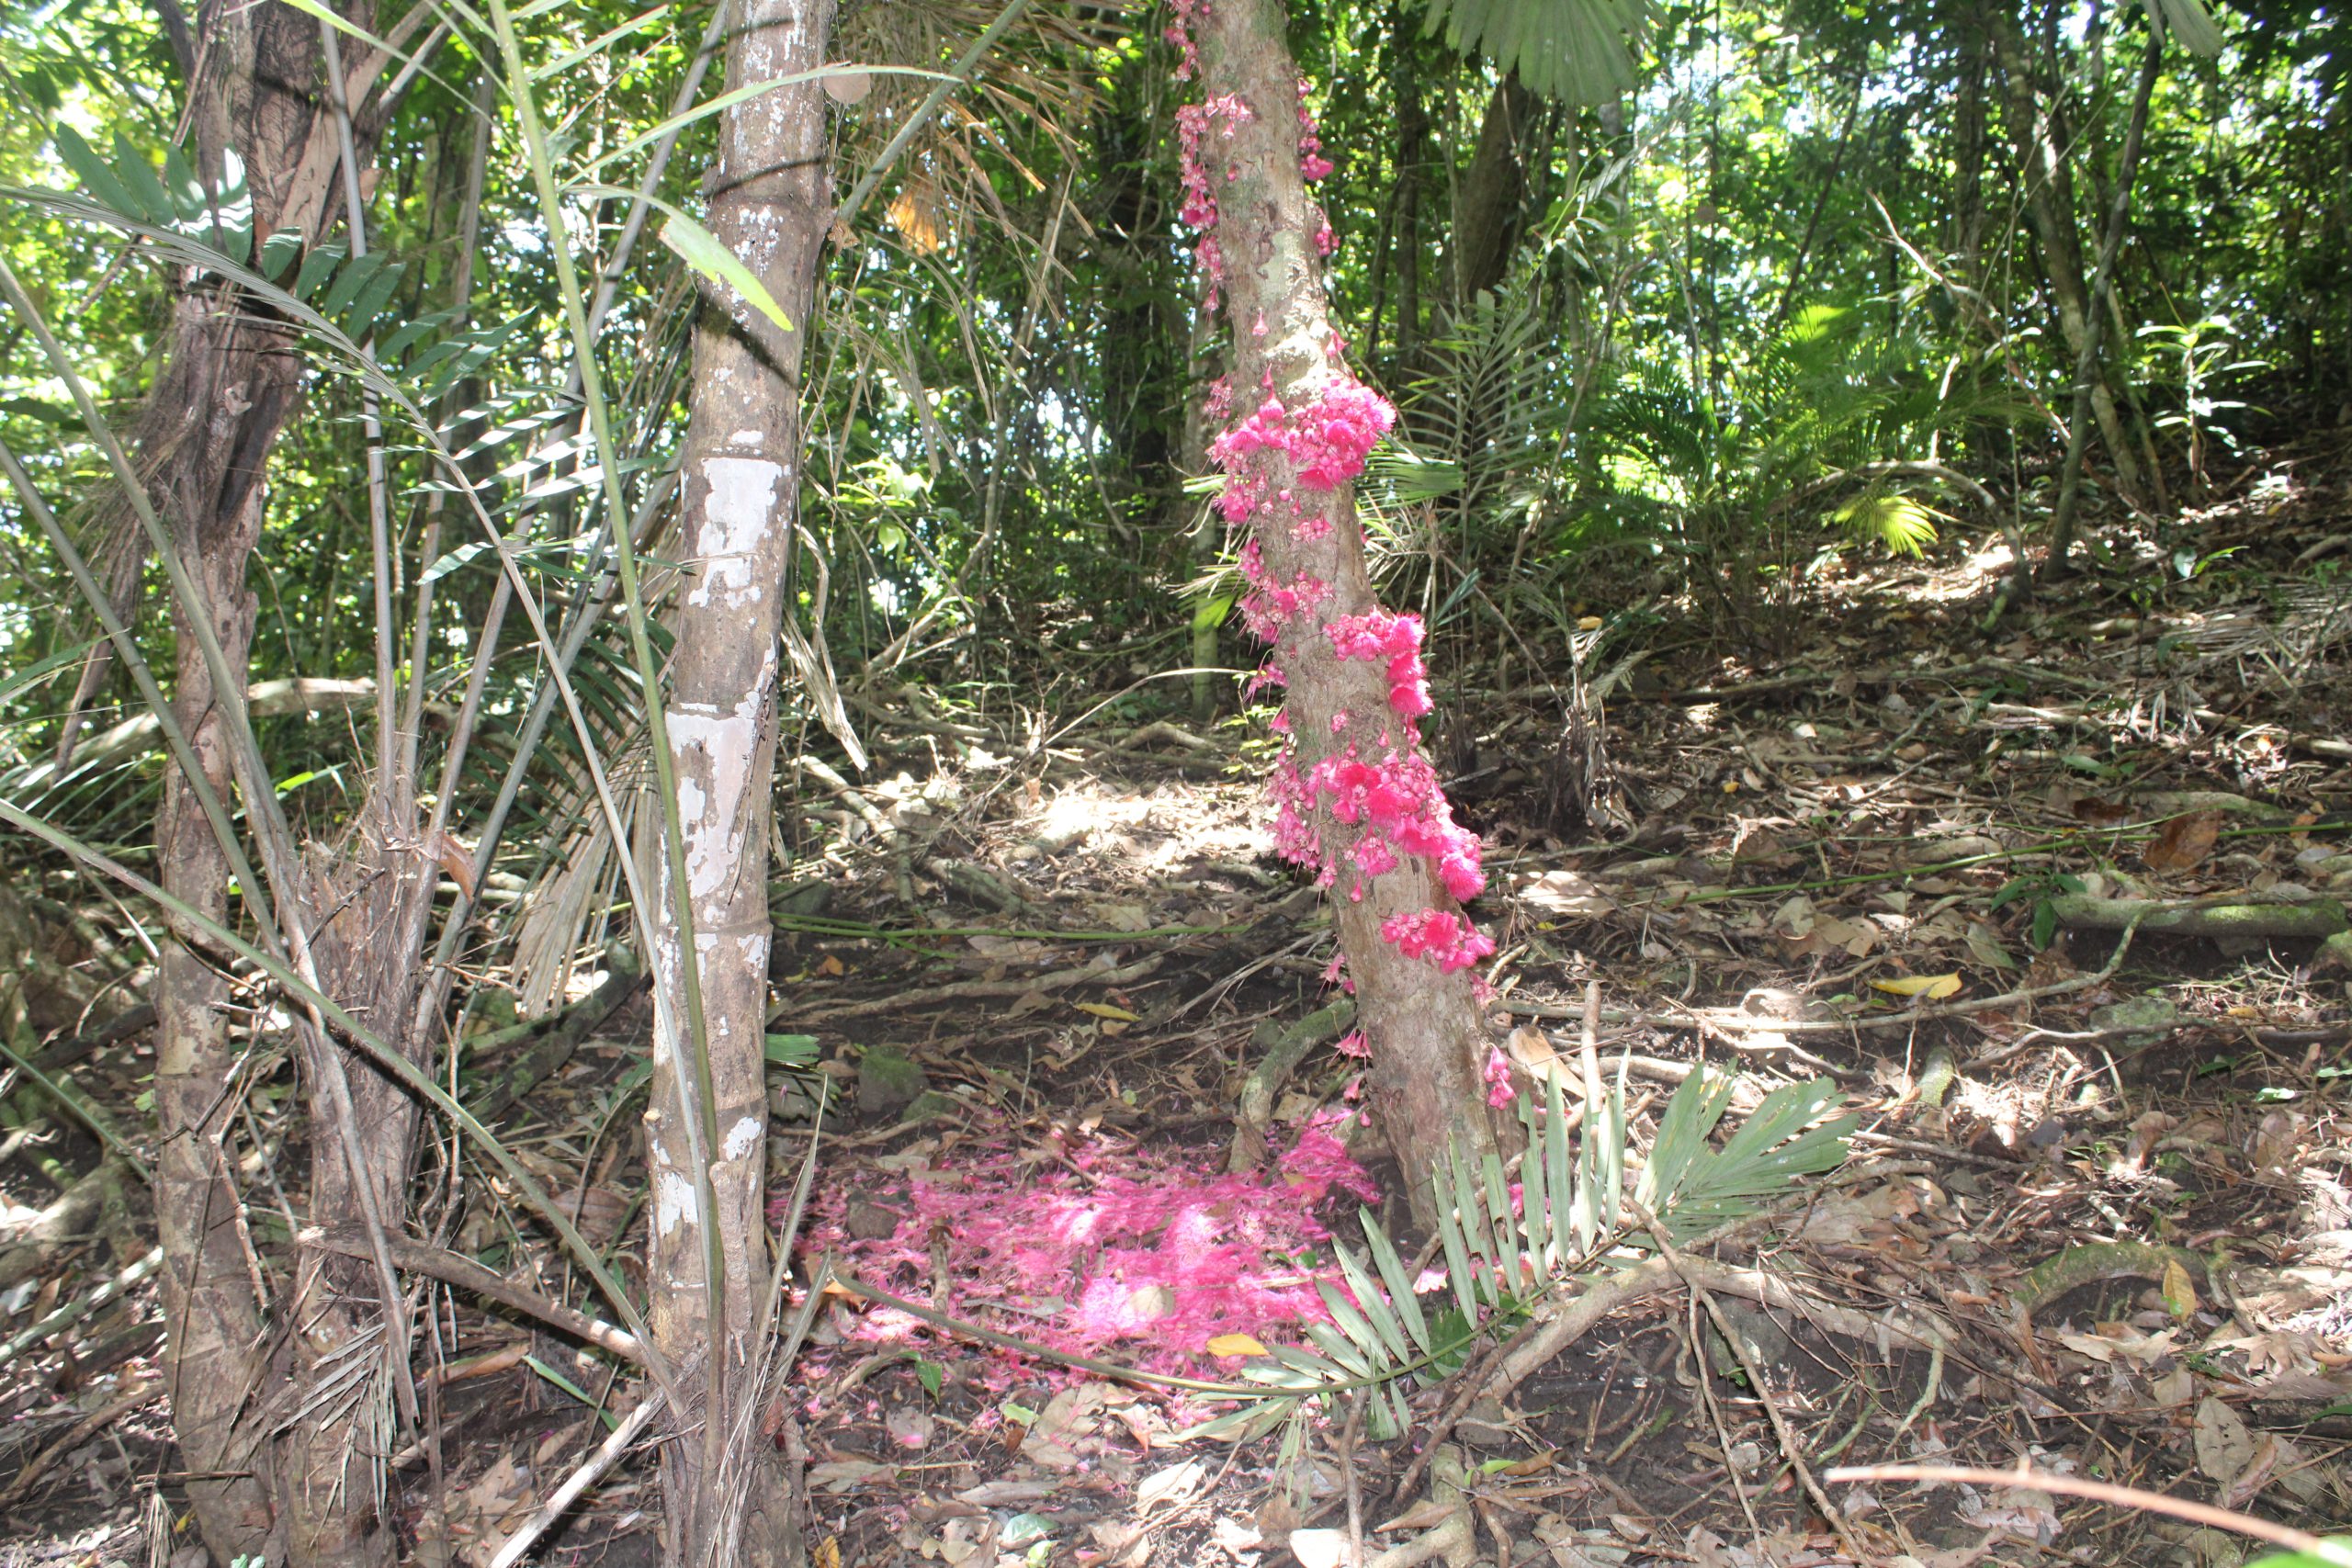 A tree trunk is in the centre of the shot, growing from the bark are bright pink flowers. A pile of fallen pink flowers builds next to the trunk. The surrounding forest floor is littered with brown laves, while green trees can be seen in the background.